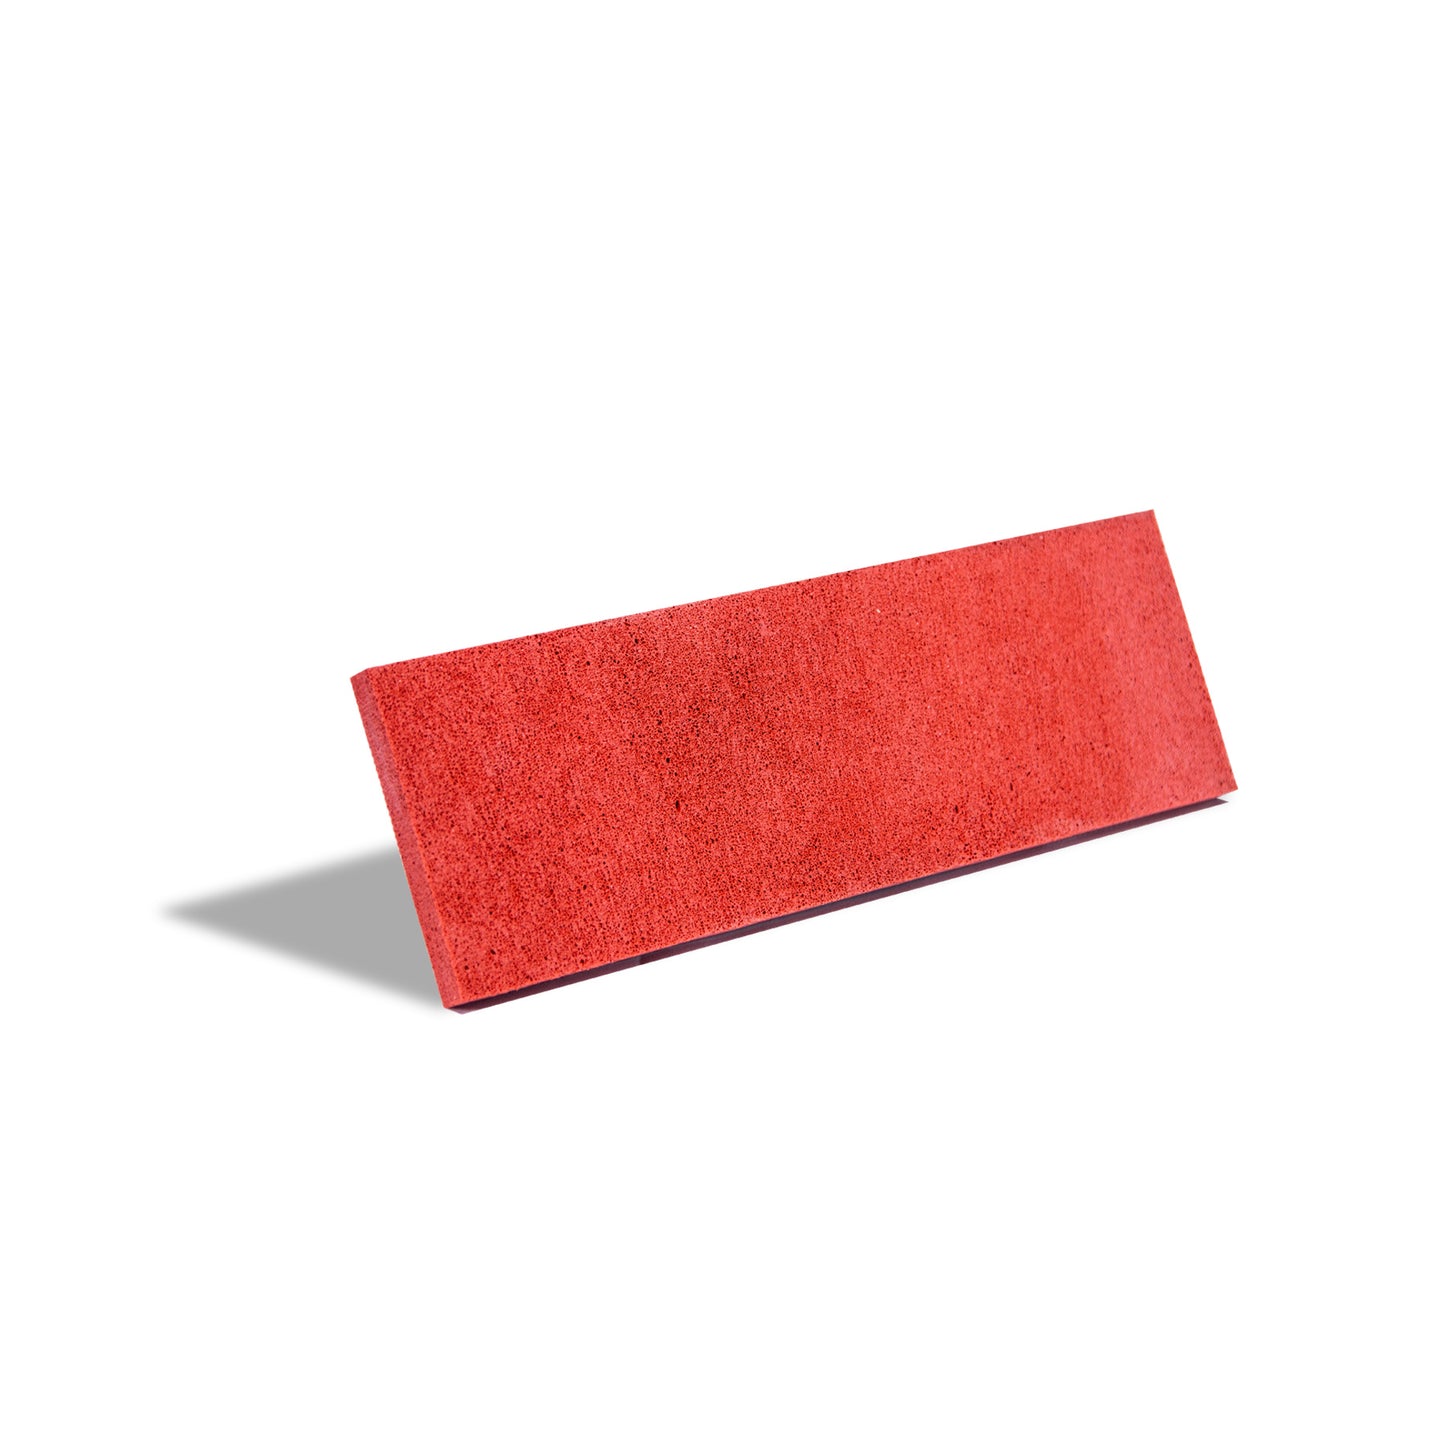 4"x12" Red Rubber Float